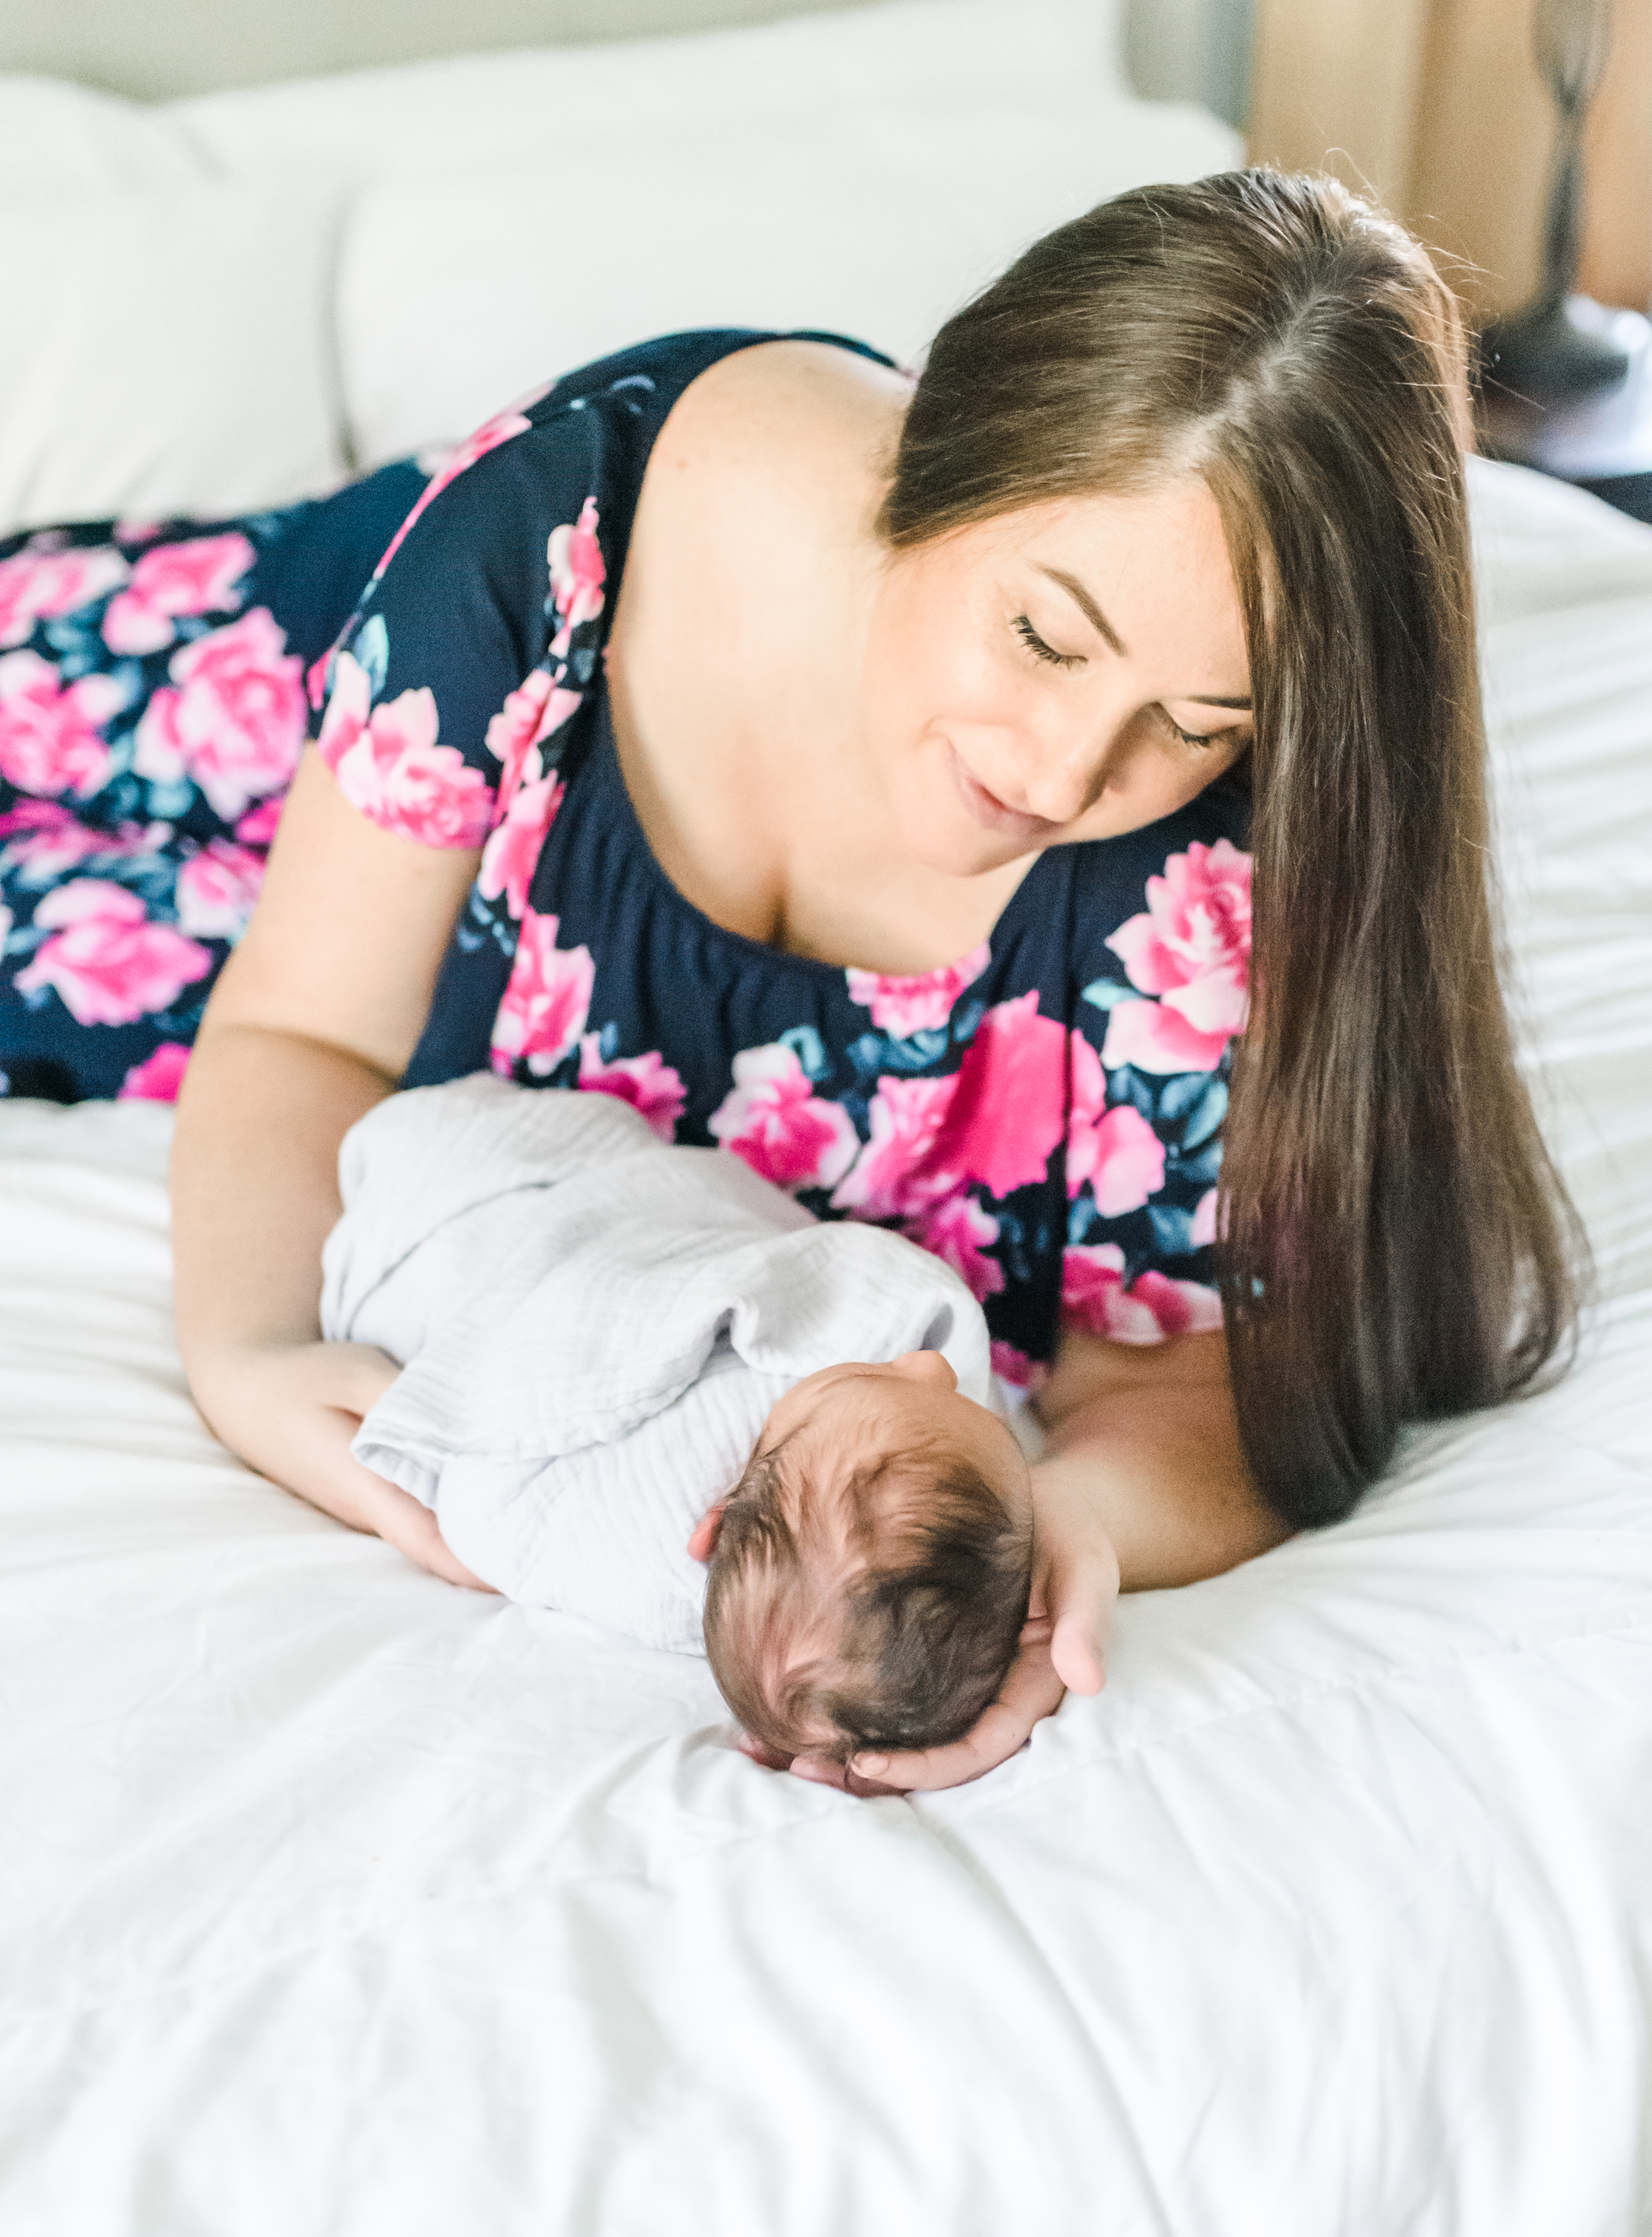 Epidurals Fail: Four Tips if it Happens to You